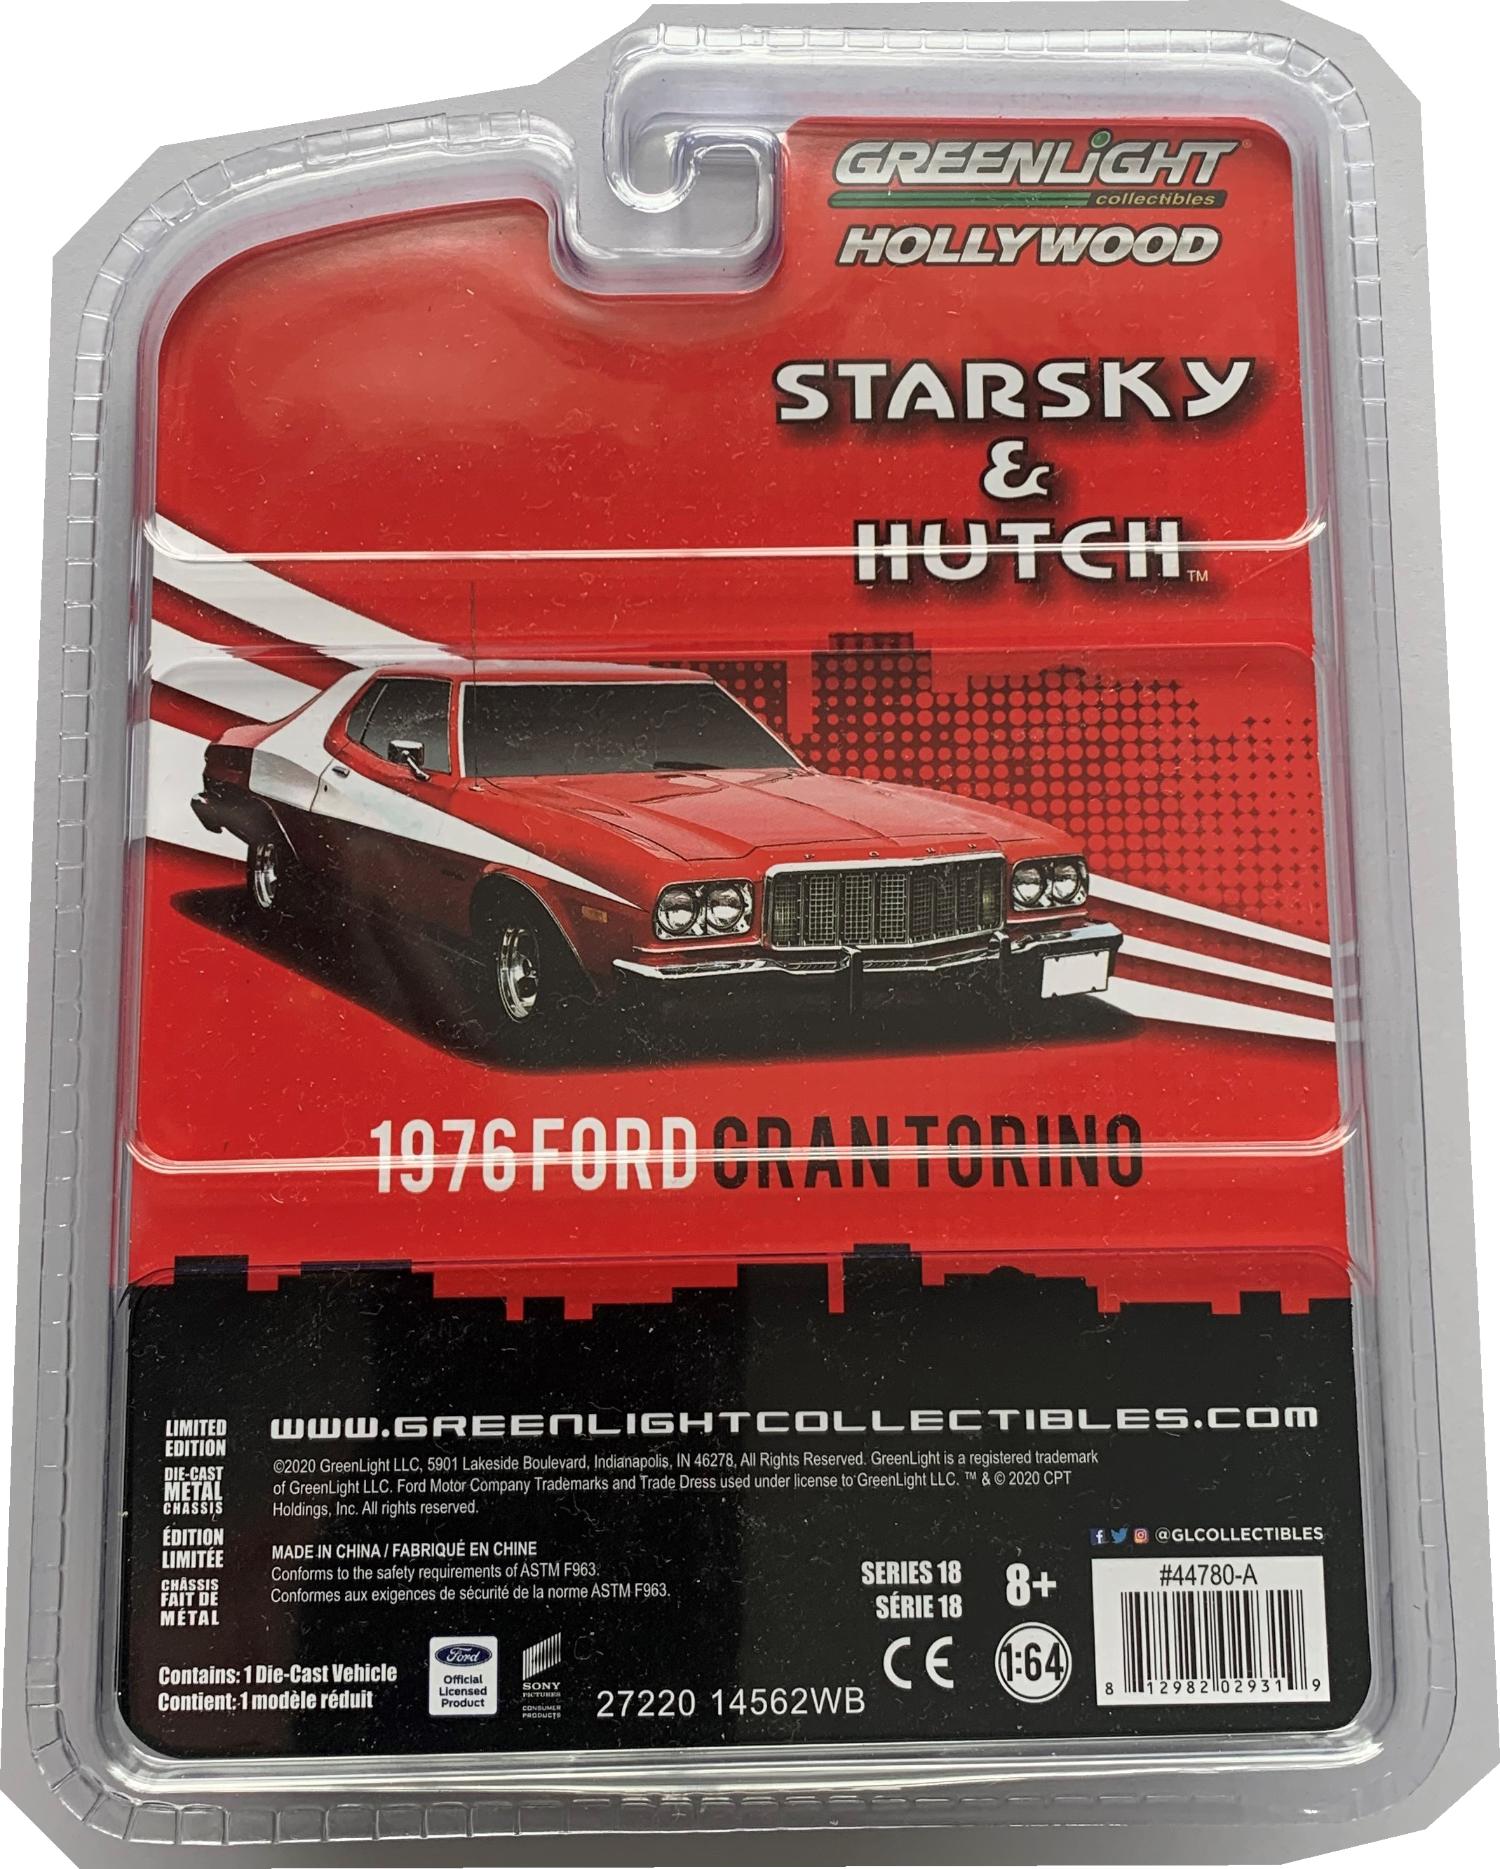 Starsky & Hutch 1976 Ford Gran Torino 1:64 scale model from Greenlight Hollywood, series 18, Limited Edition model